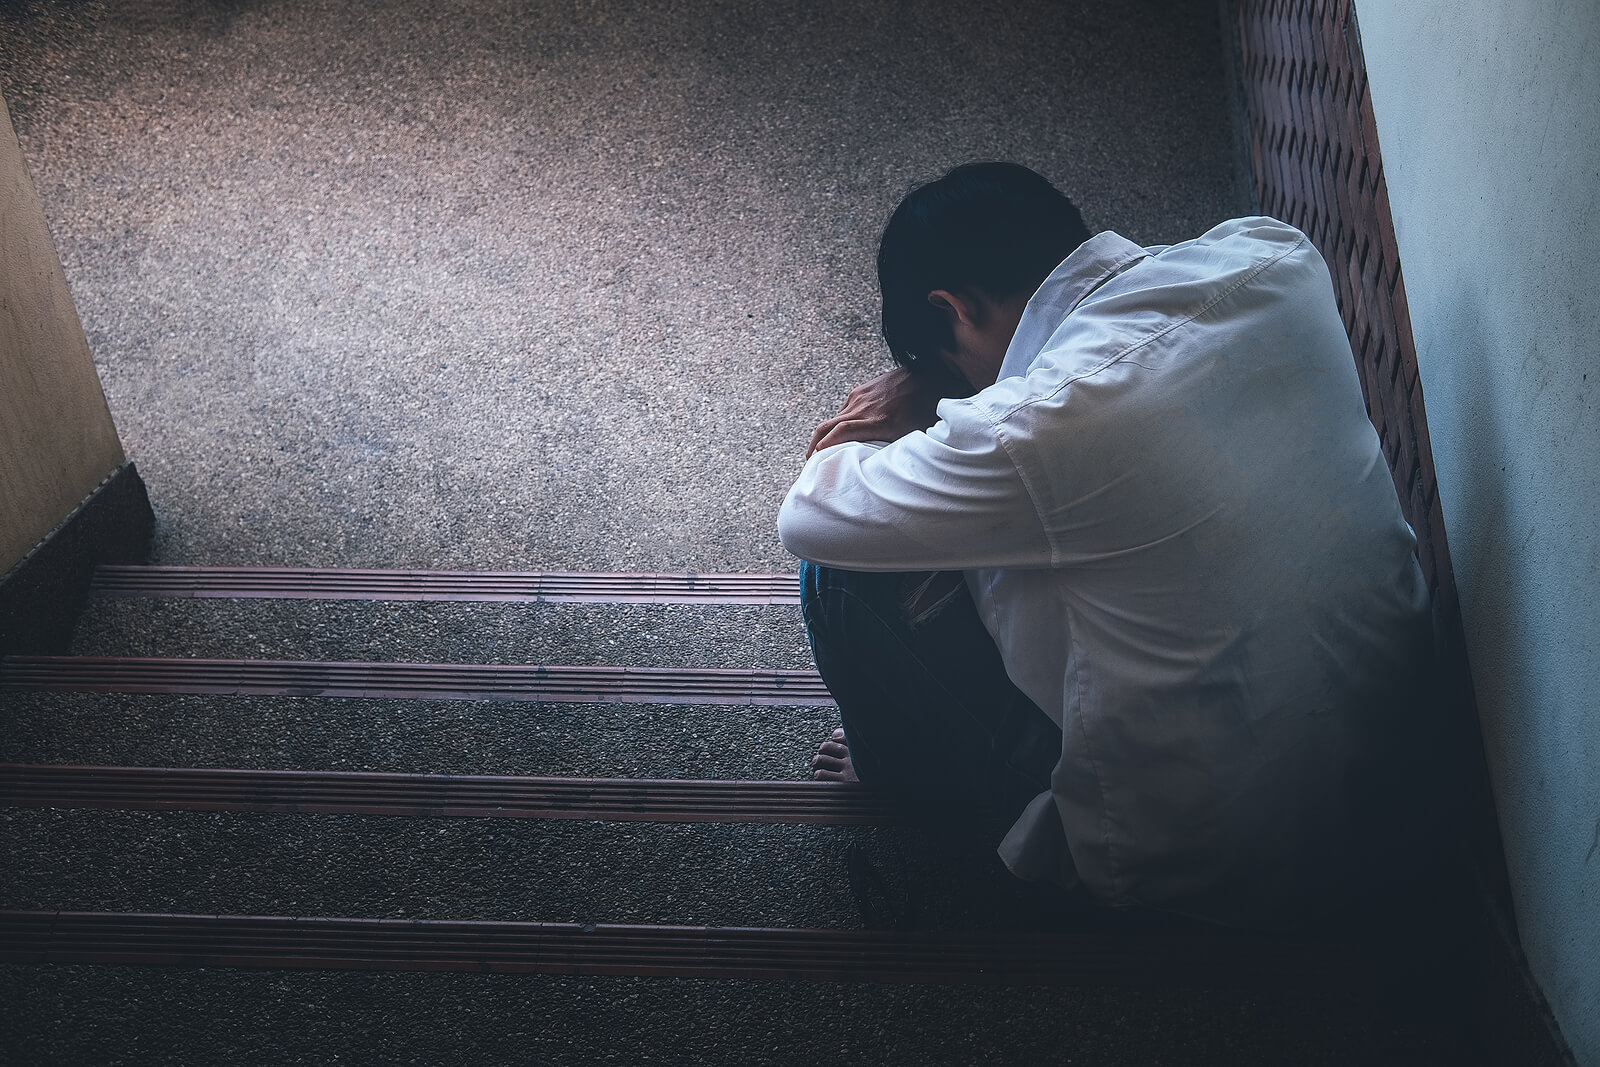 A sad man is sitting on stairs and crying. Looking to heal from your relational trauma in Austin, TX? Individual therapy for relationship issues in Texas can help you.